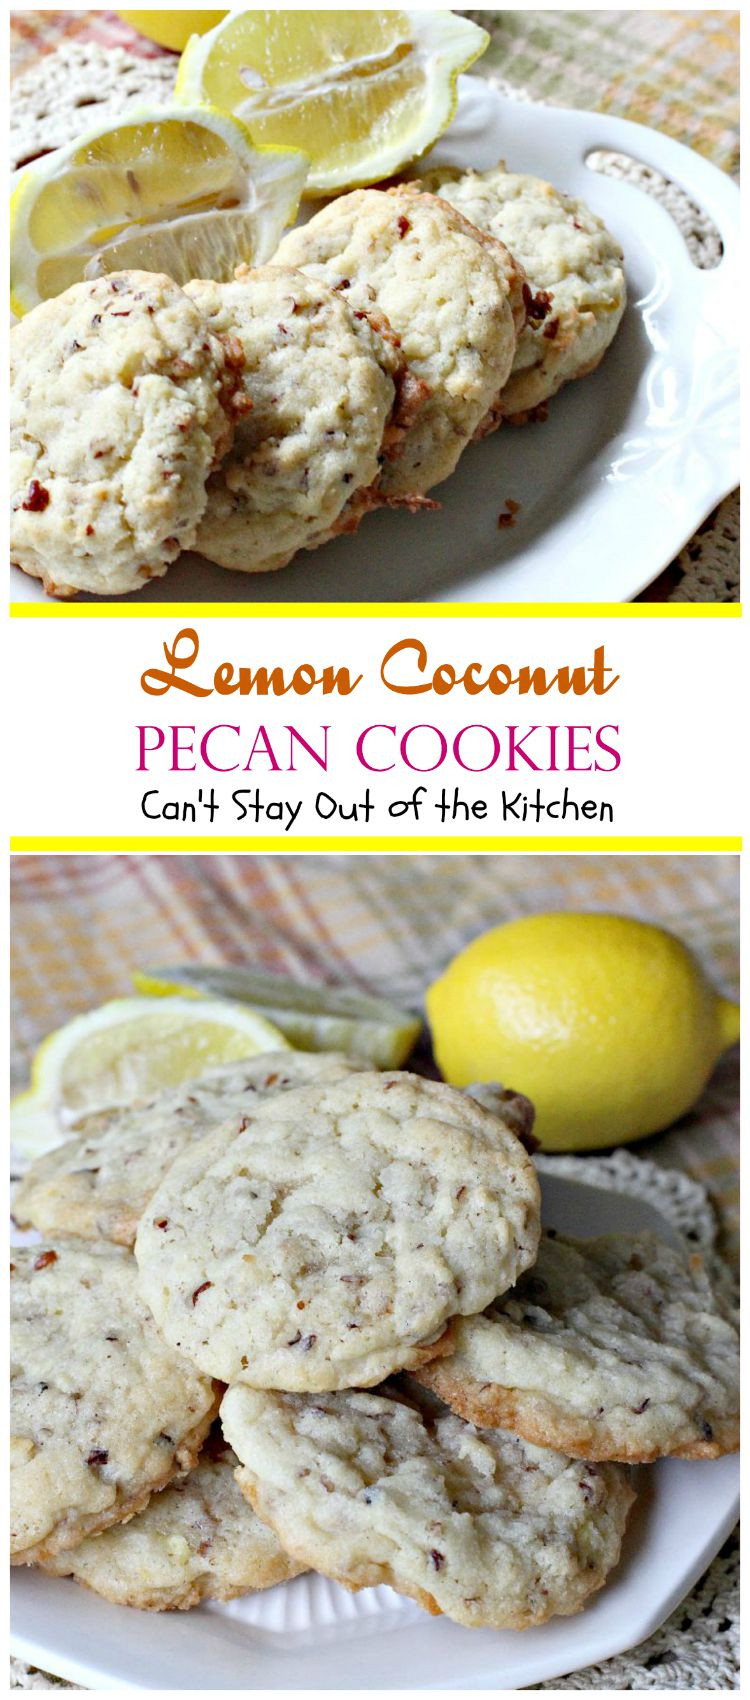 Coconut Christmas Cookies
 Lemon Coconut Pecan Cookies Can t Stay Out of the Kitchen